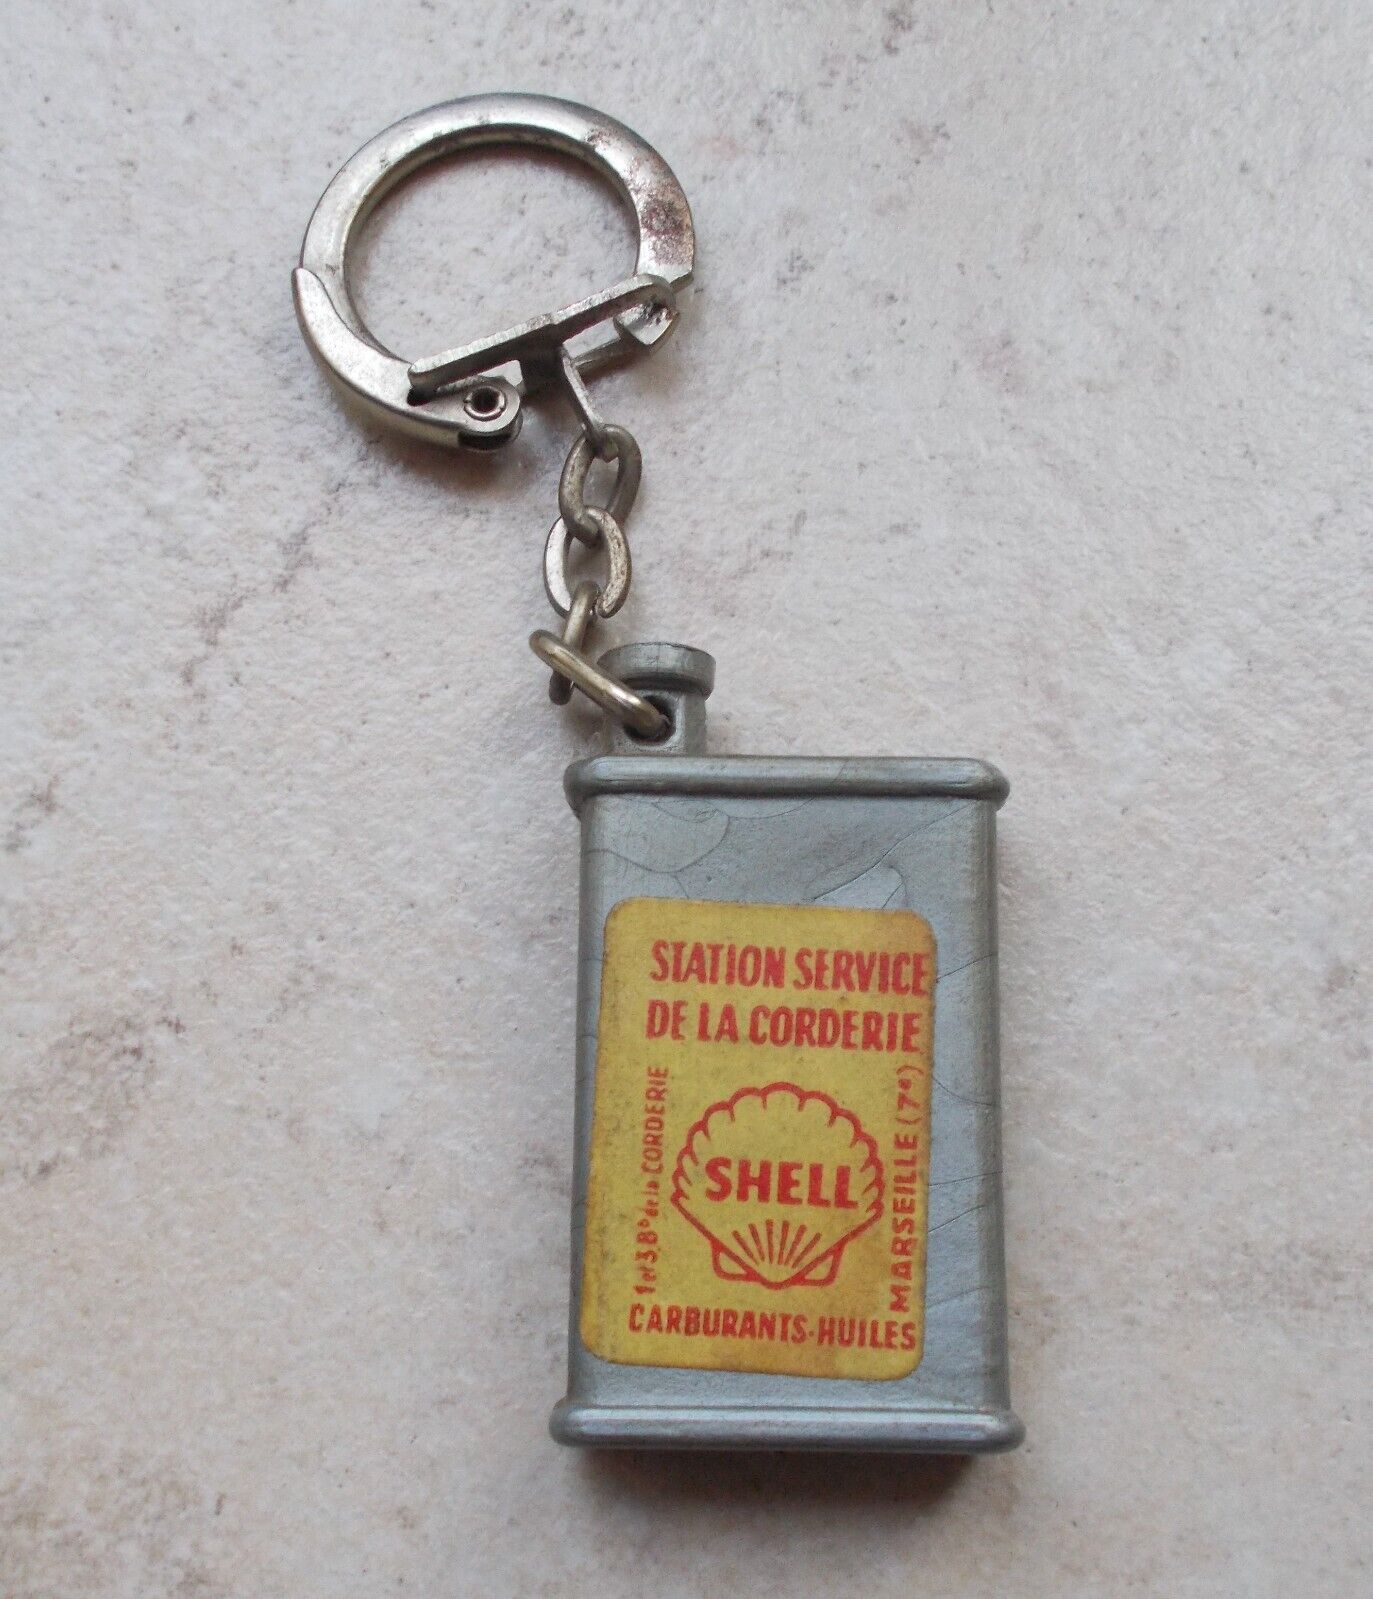 Vintage Shell Motor Oil Keychain Key Ring France French Antique Old 1970s #12